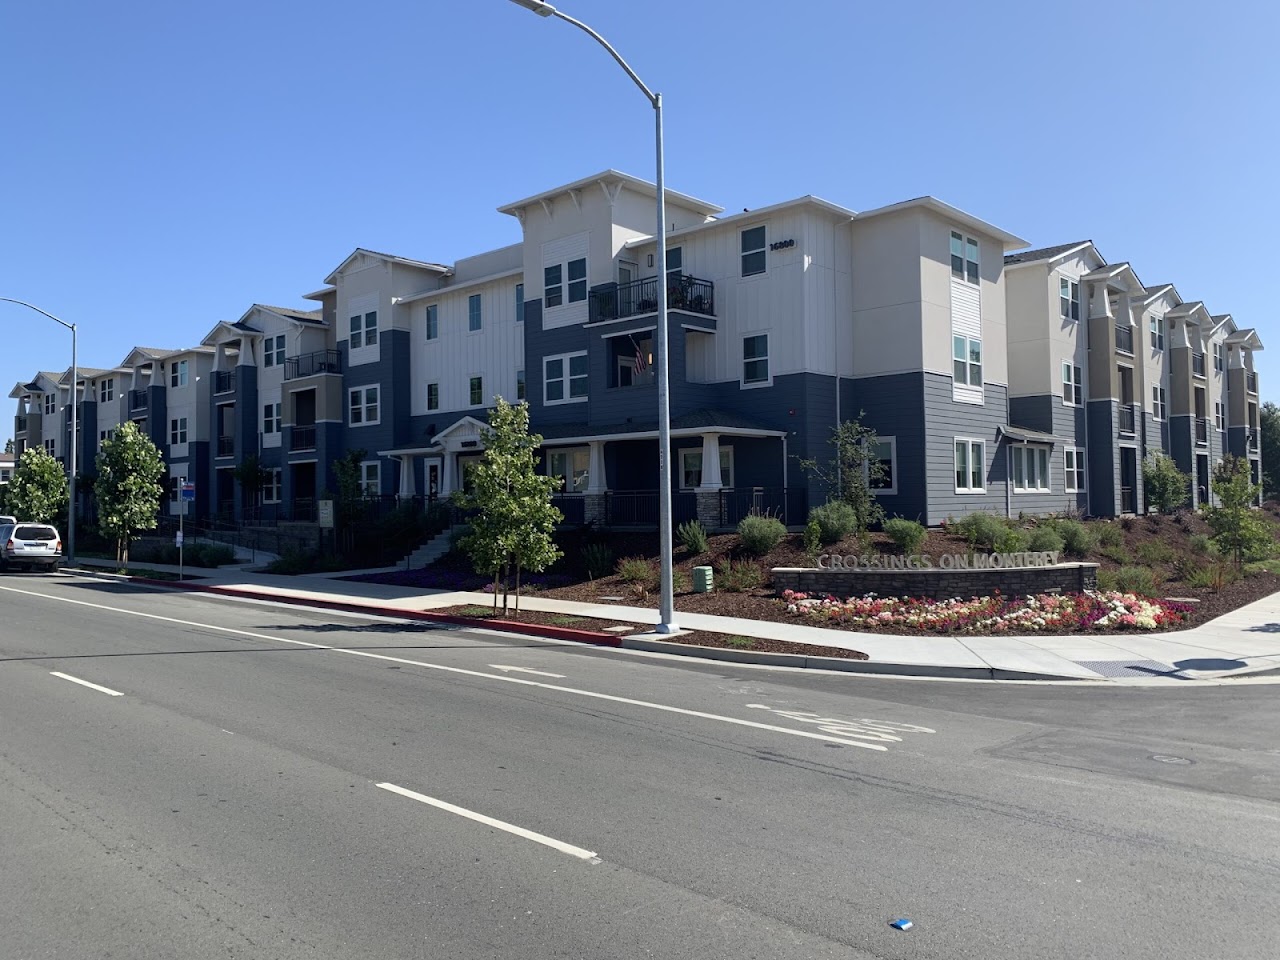 Photo of CROSSINGS ON MONTEREY. Affordable housing located at 16800 MONTEREY RD. MORGAN HILL, CA 95037